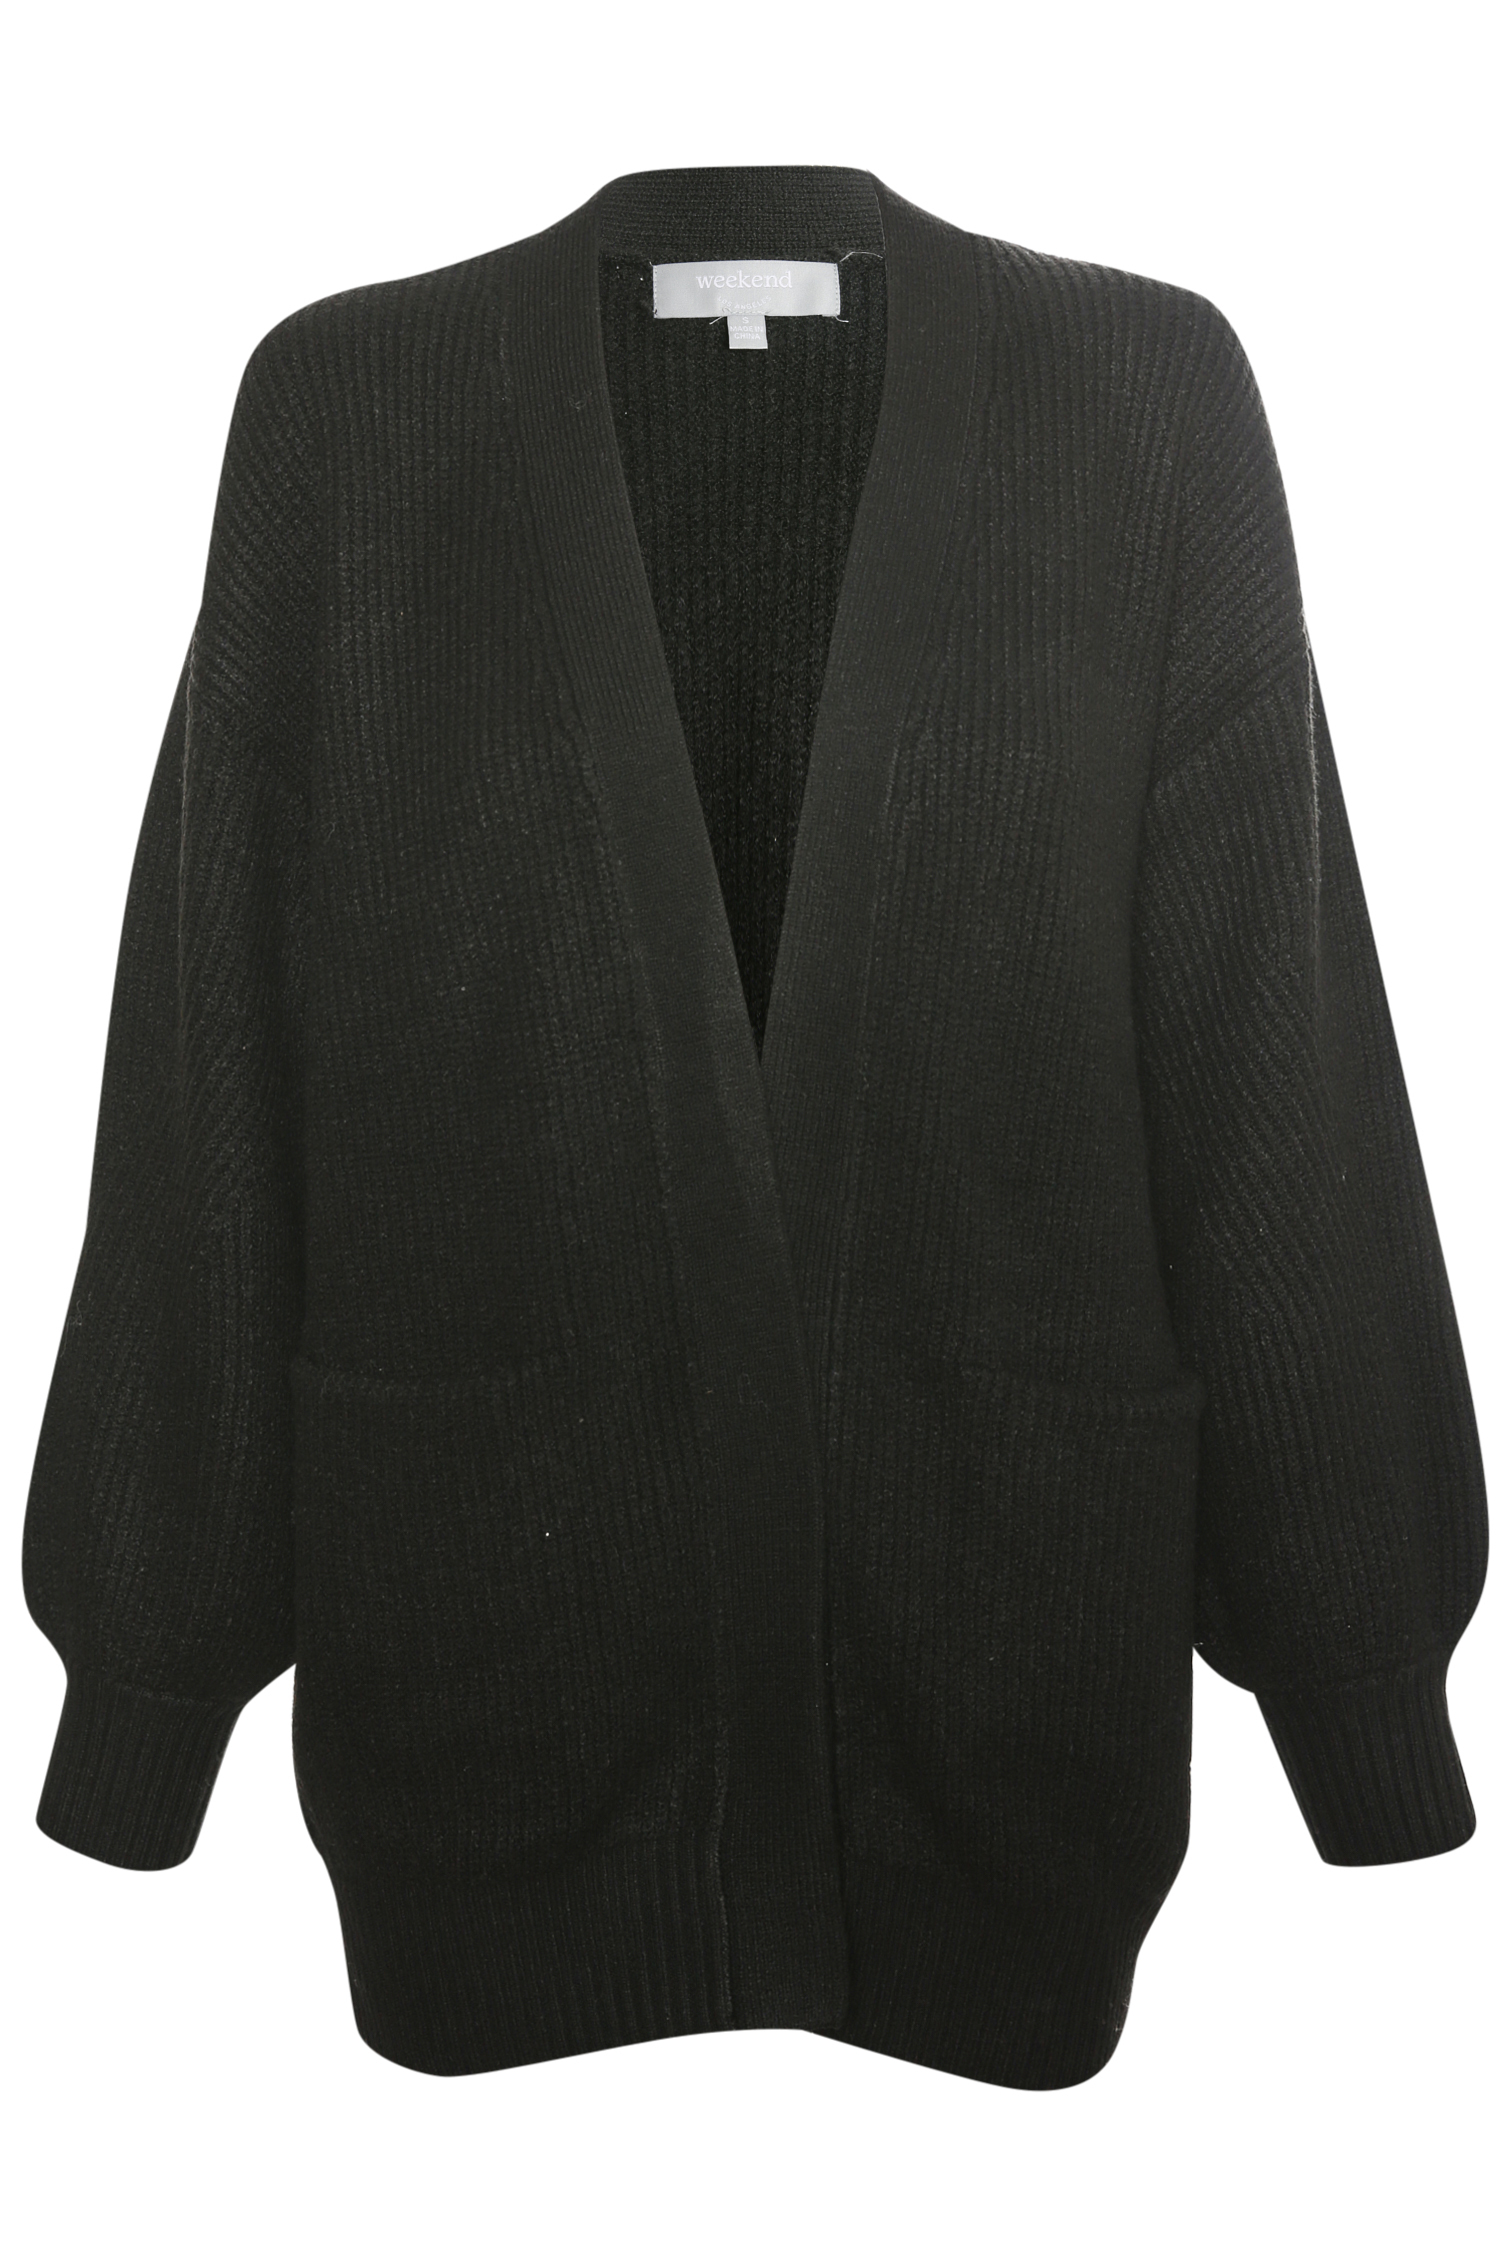 Thread & Supply Open Front Cardigan